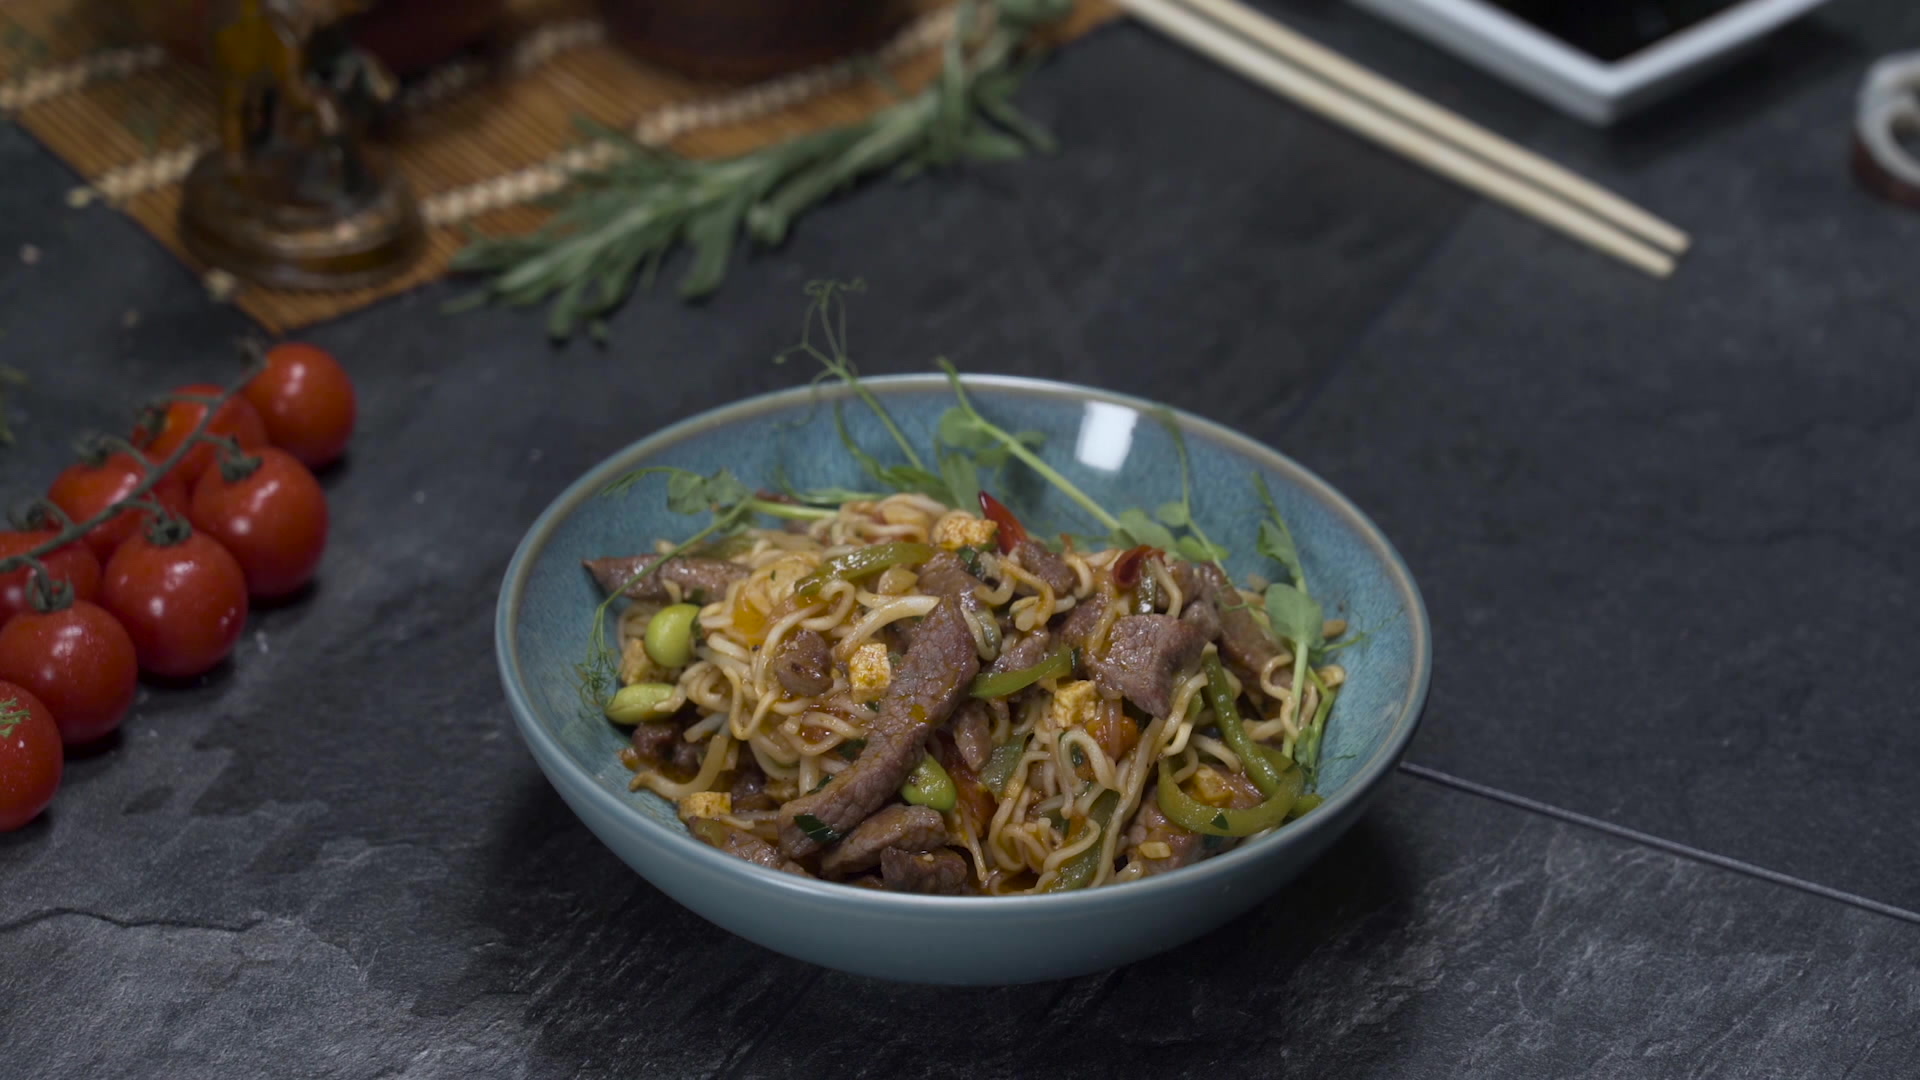 Lamb stew with egg noodles